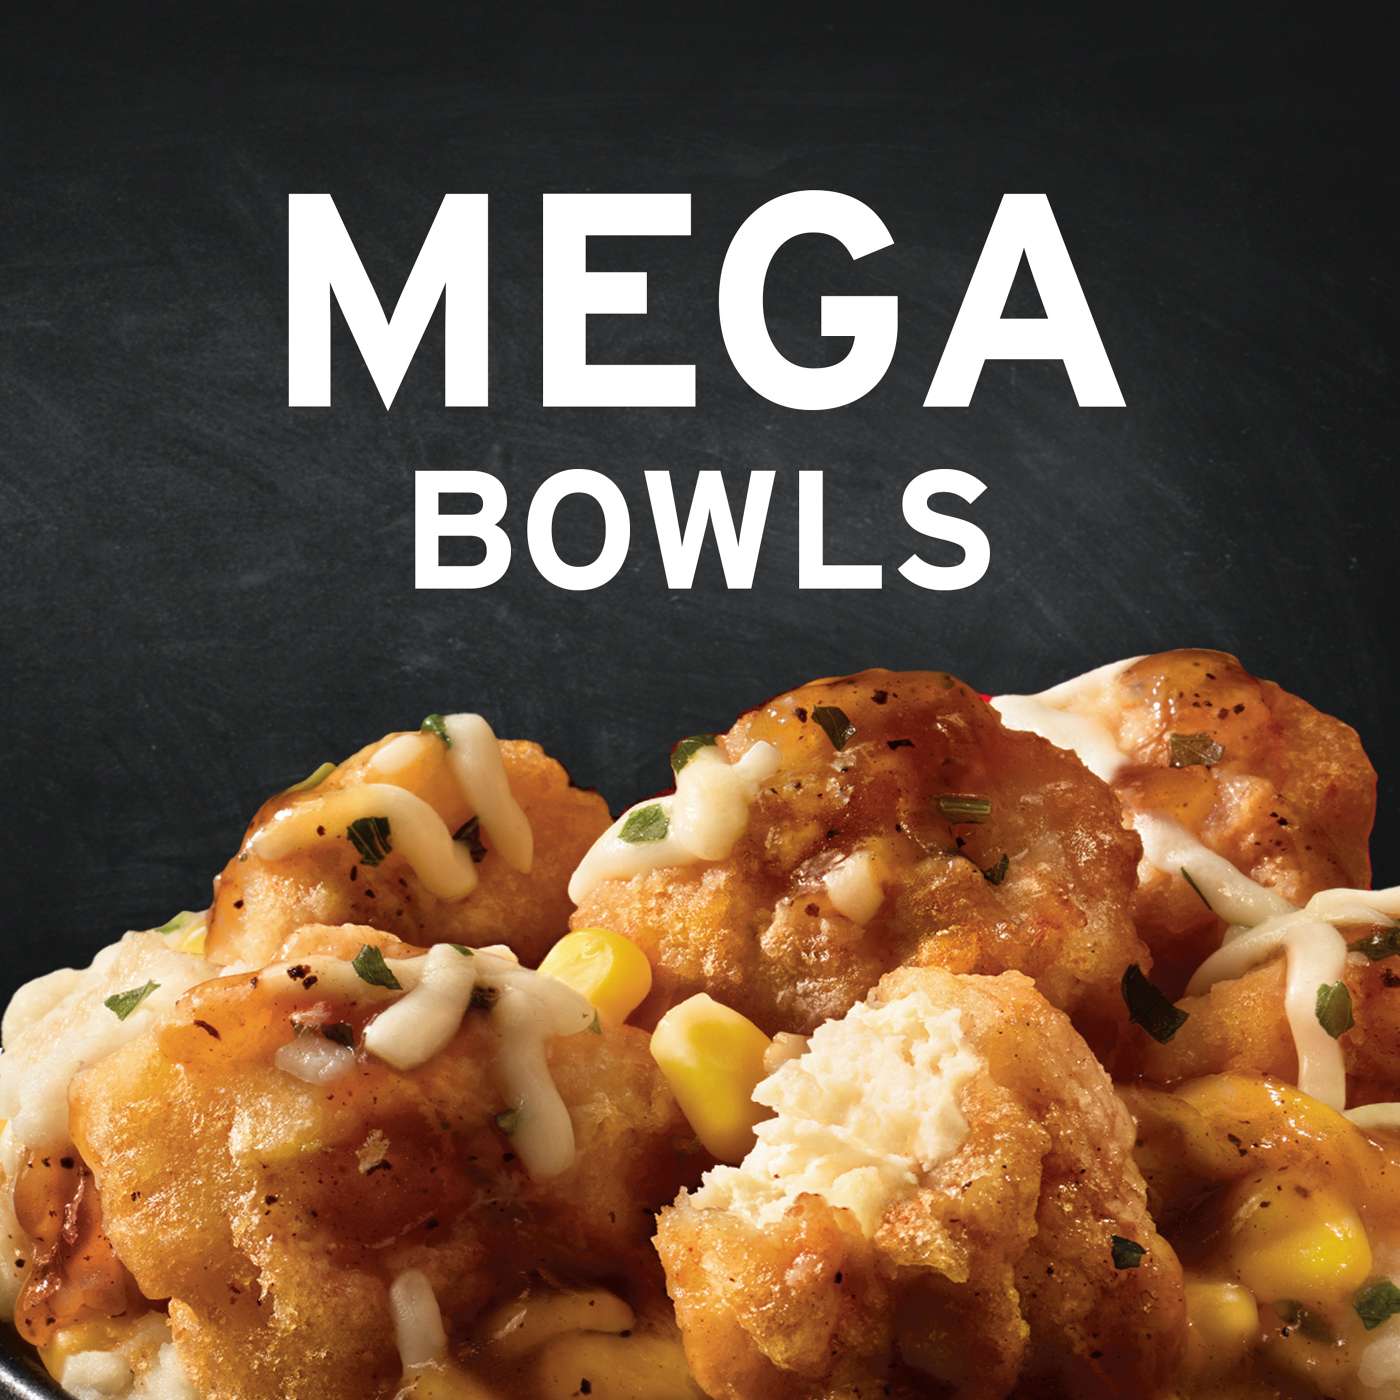 Banquet Mega Bowls 18g Protein Country Fried Chicken Frozen Meal; image 7 of 7